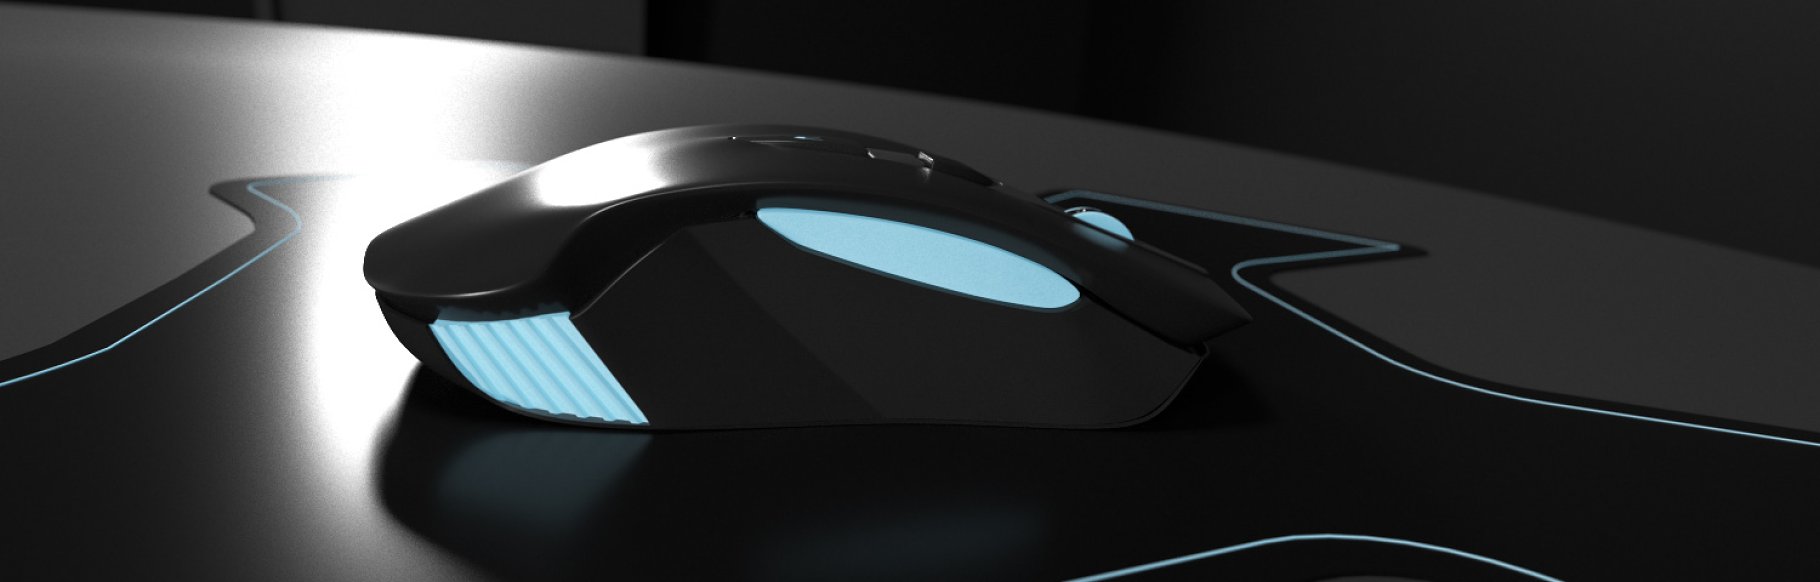 Rendering an exquisite 3d model of a gaming mouse